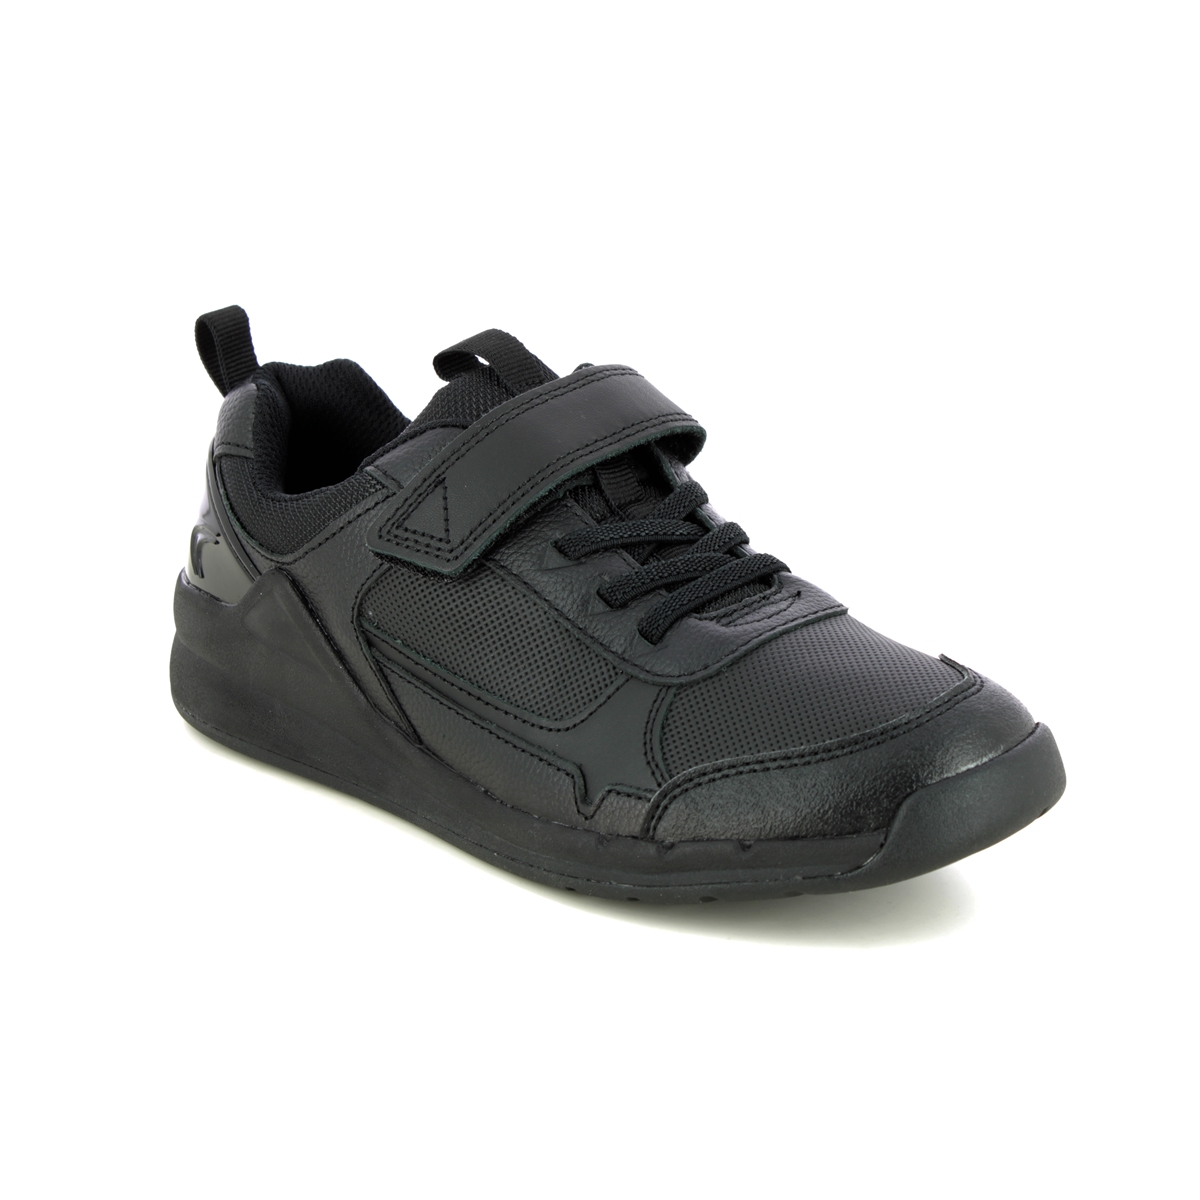 Clarks Orbit Sprint Y Black Leather Kids Boys Shoes 534746F In Size 6.5 In Plain Black Leather F Width Fitting Regular Fit For School For kids